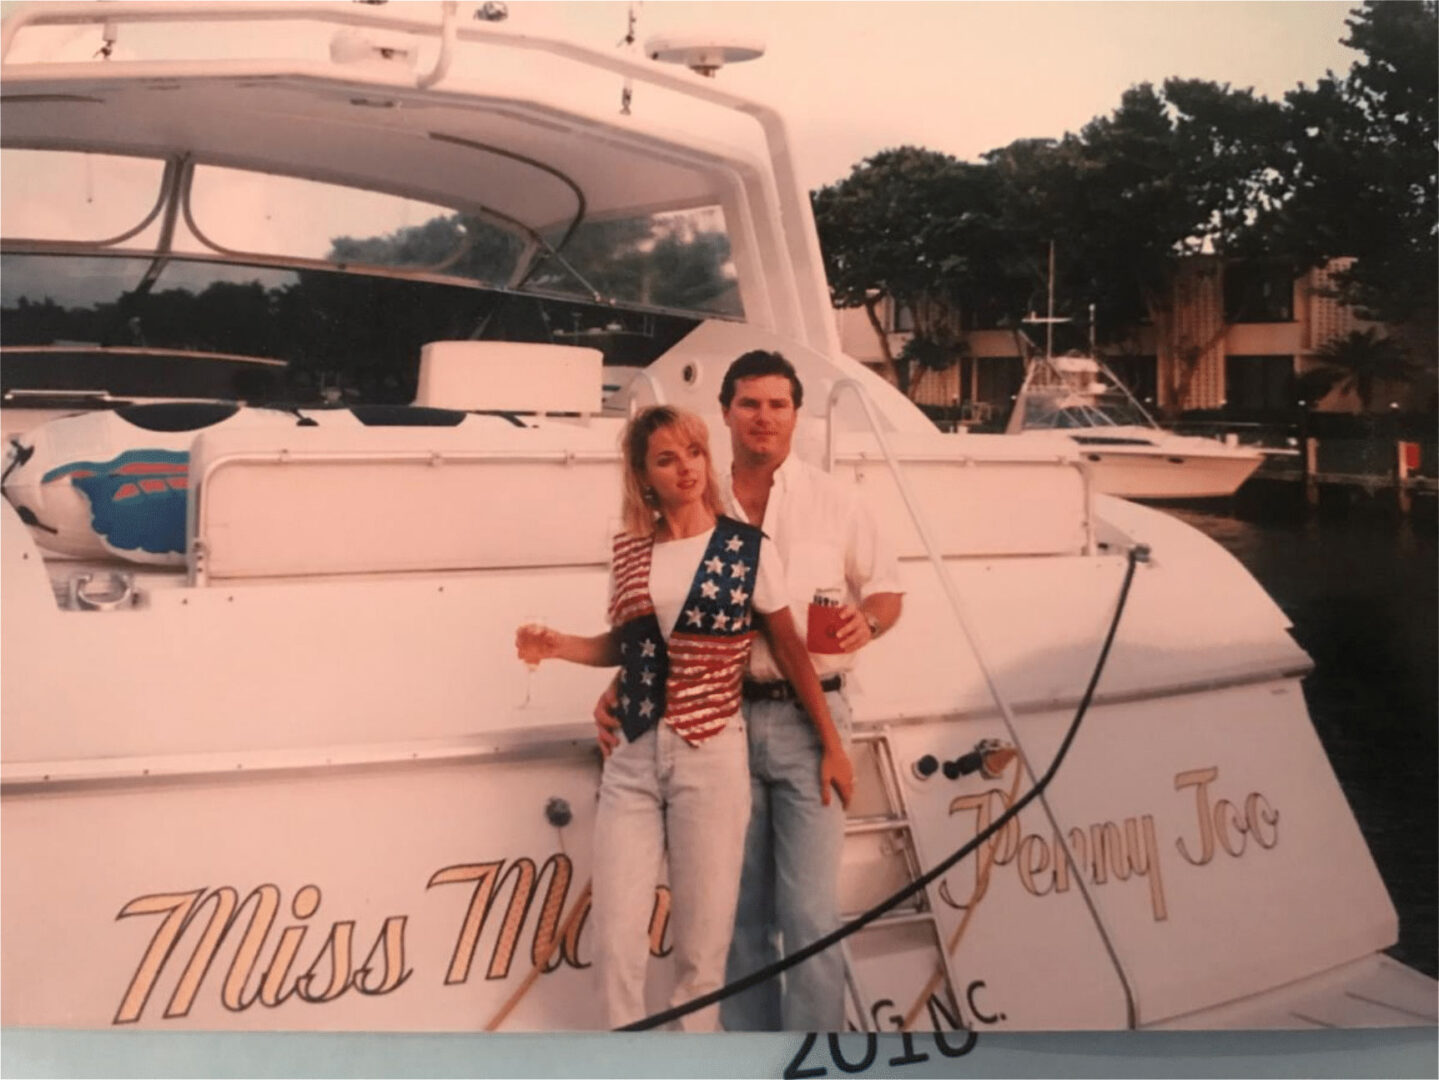 A couple taking a photo in front of a yacht